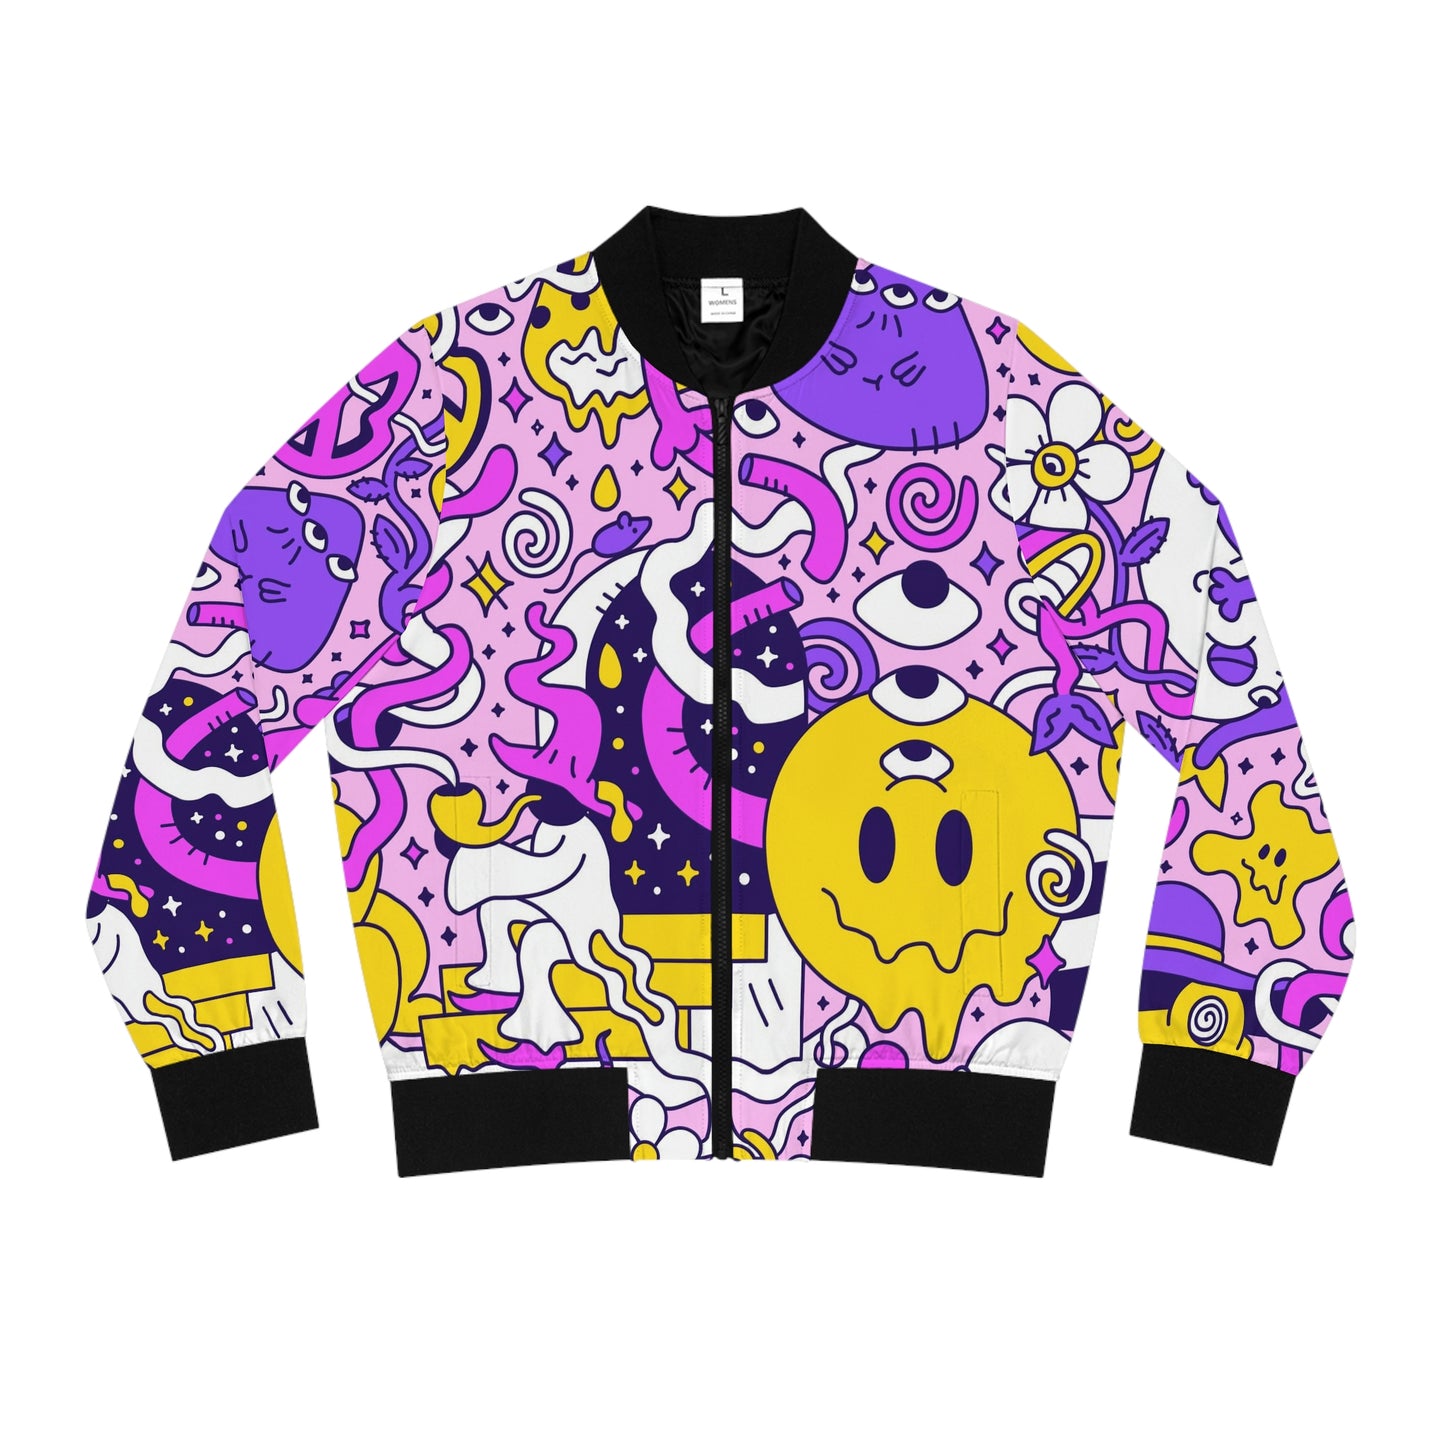 Ying Yang and Trippy - Women's Bomber Jacket (AOP)